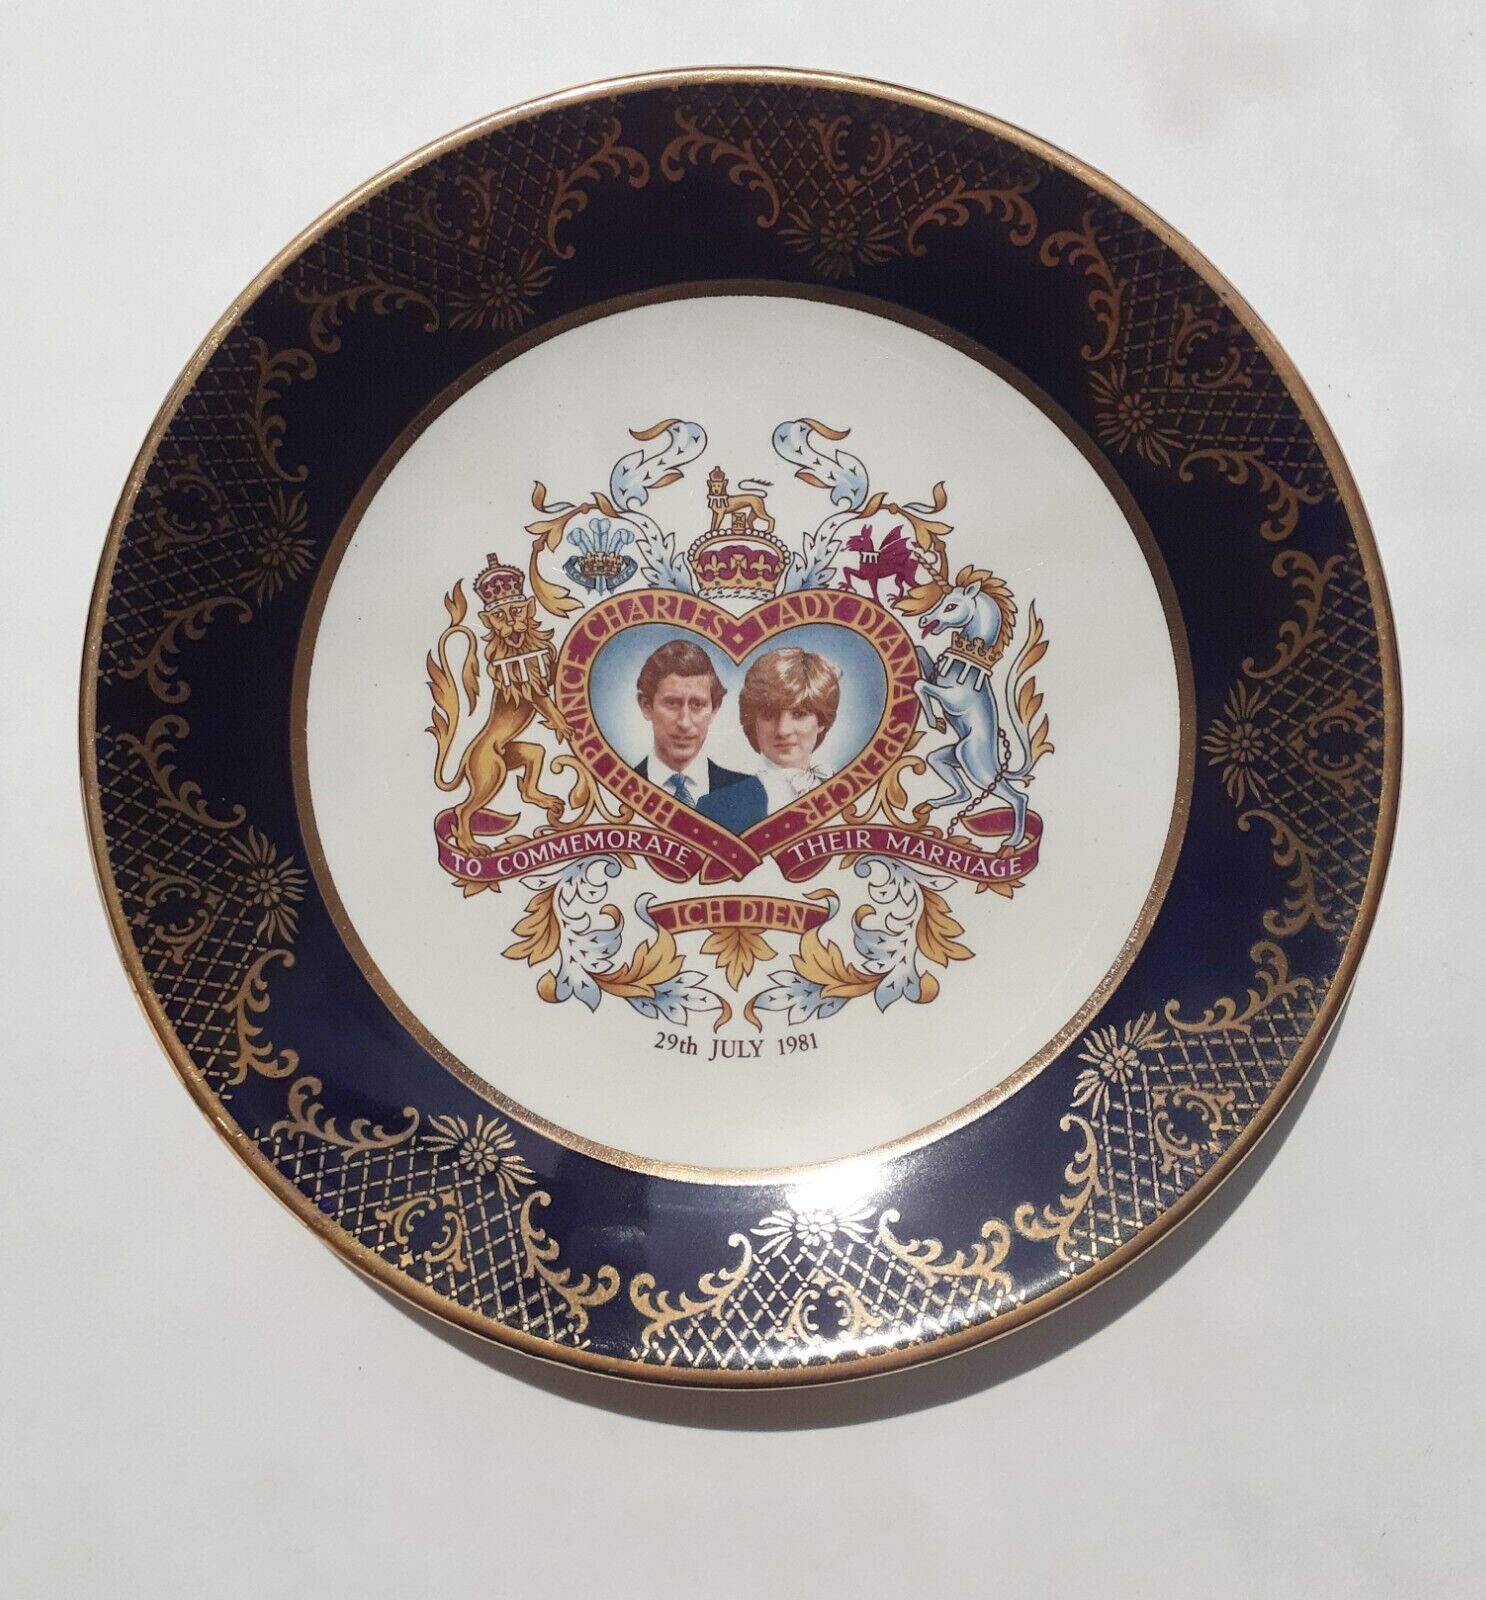 HRH Prince Charles & Lady Diana Spencer Marriage Plate July 29 1981 Ich Dien